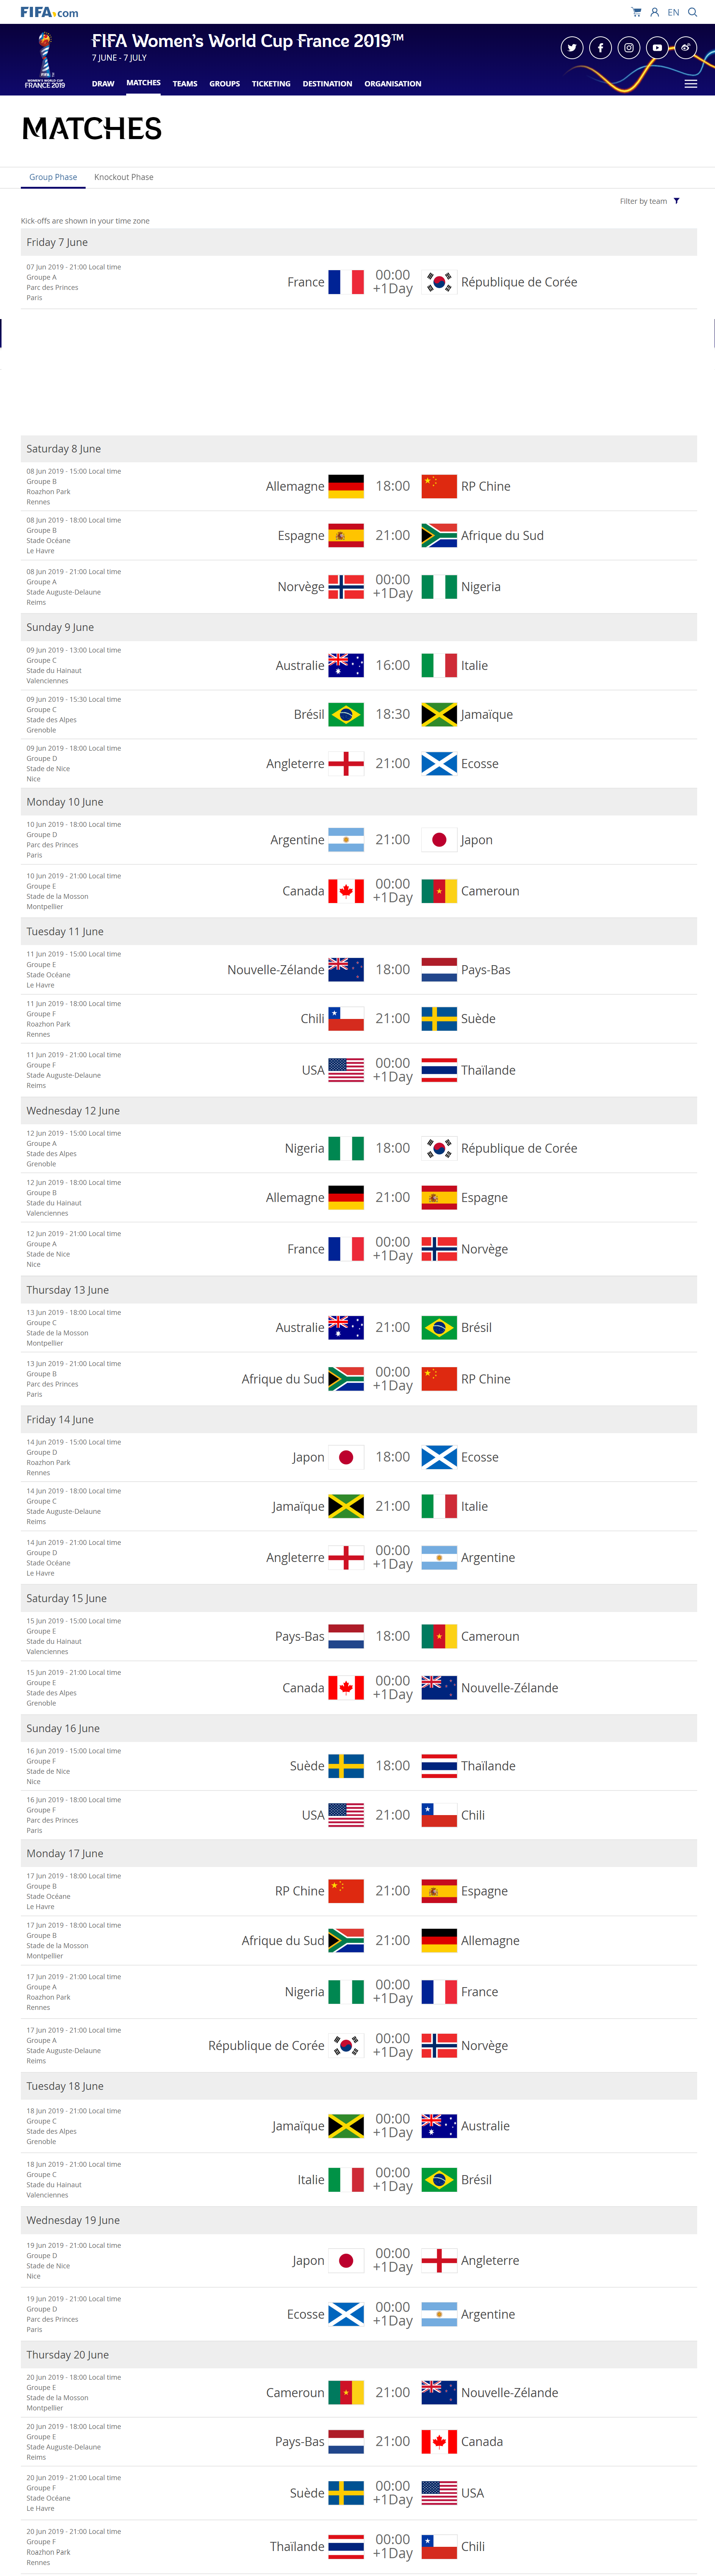 FIFA Women's World Cup Schedule In France 2019